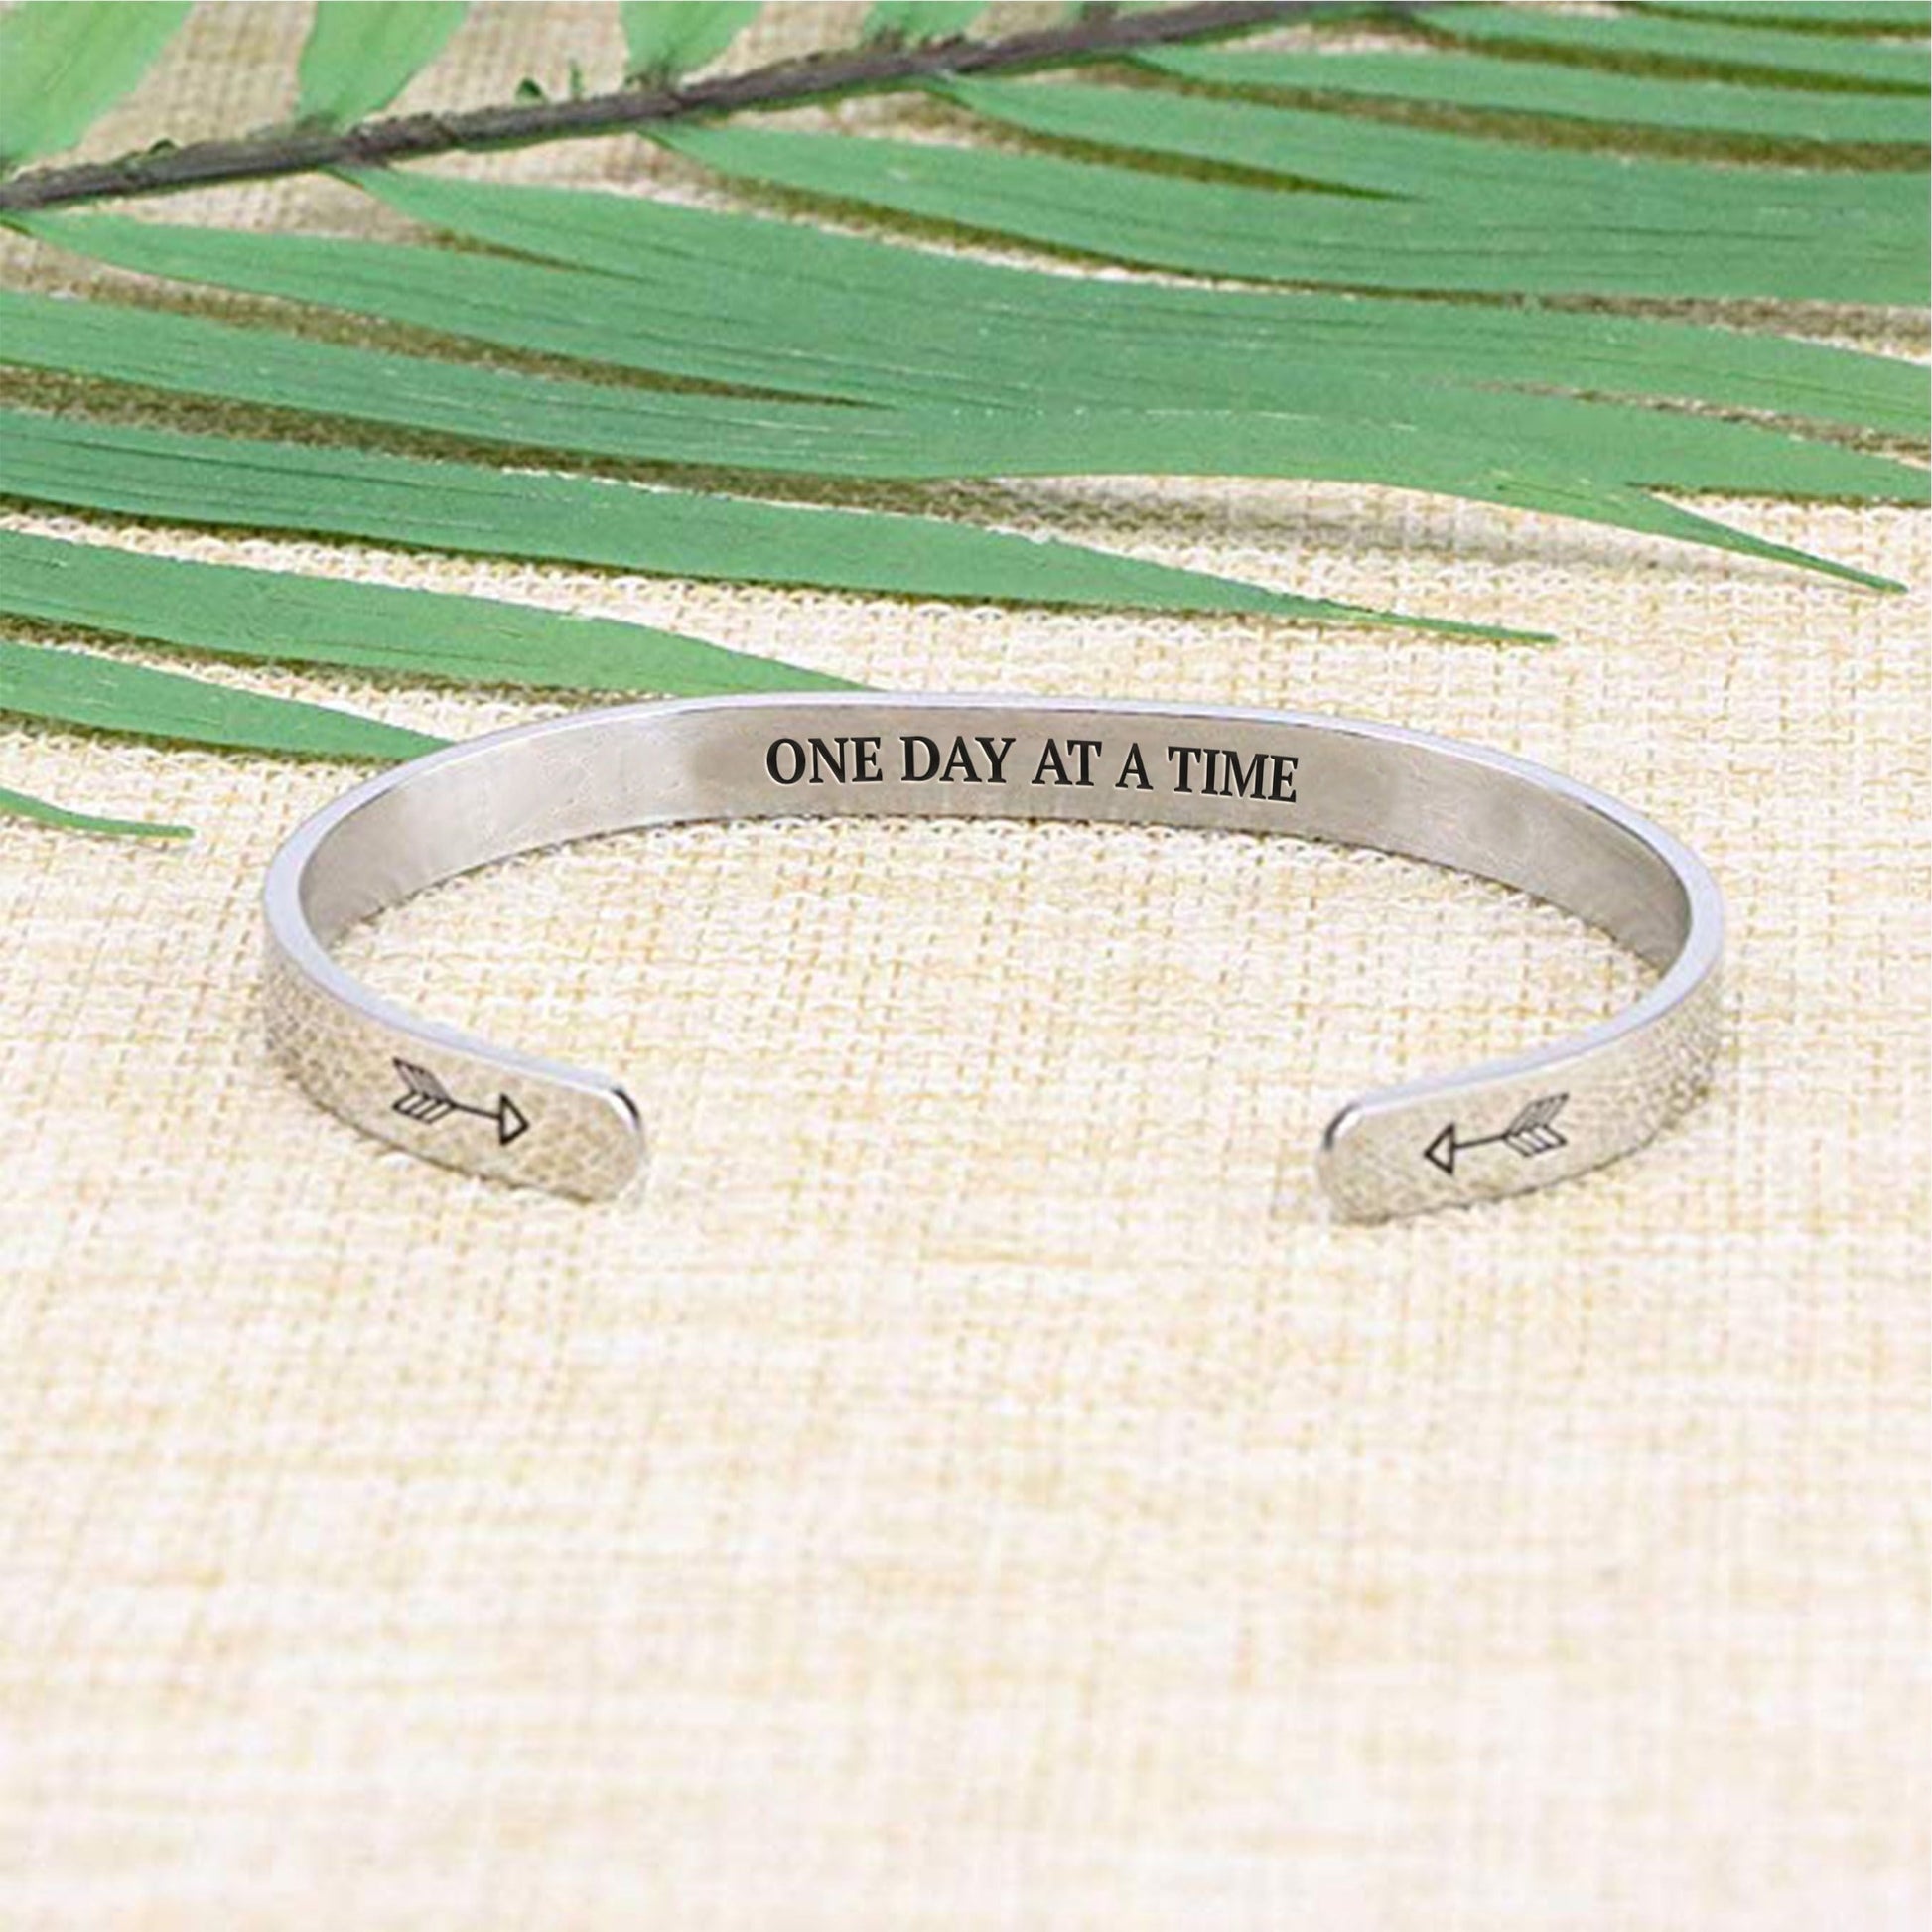 One day at a time bracelet with silver plating laying flat on a burlap surface with a leafy background